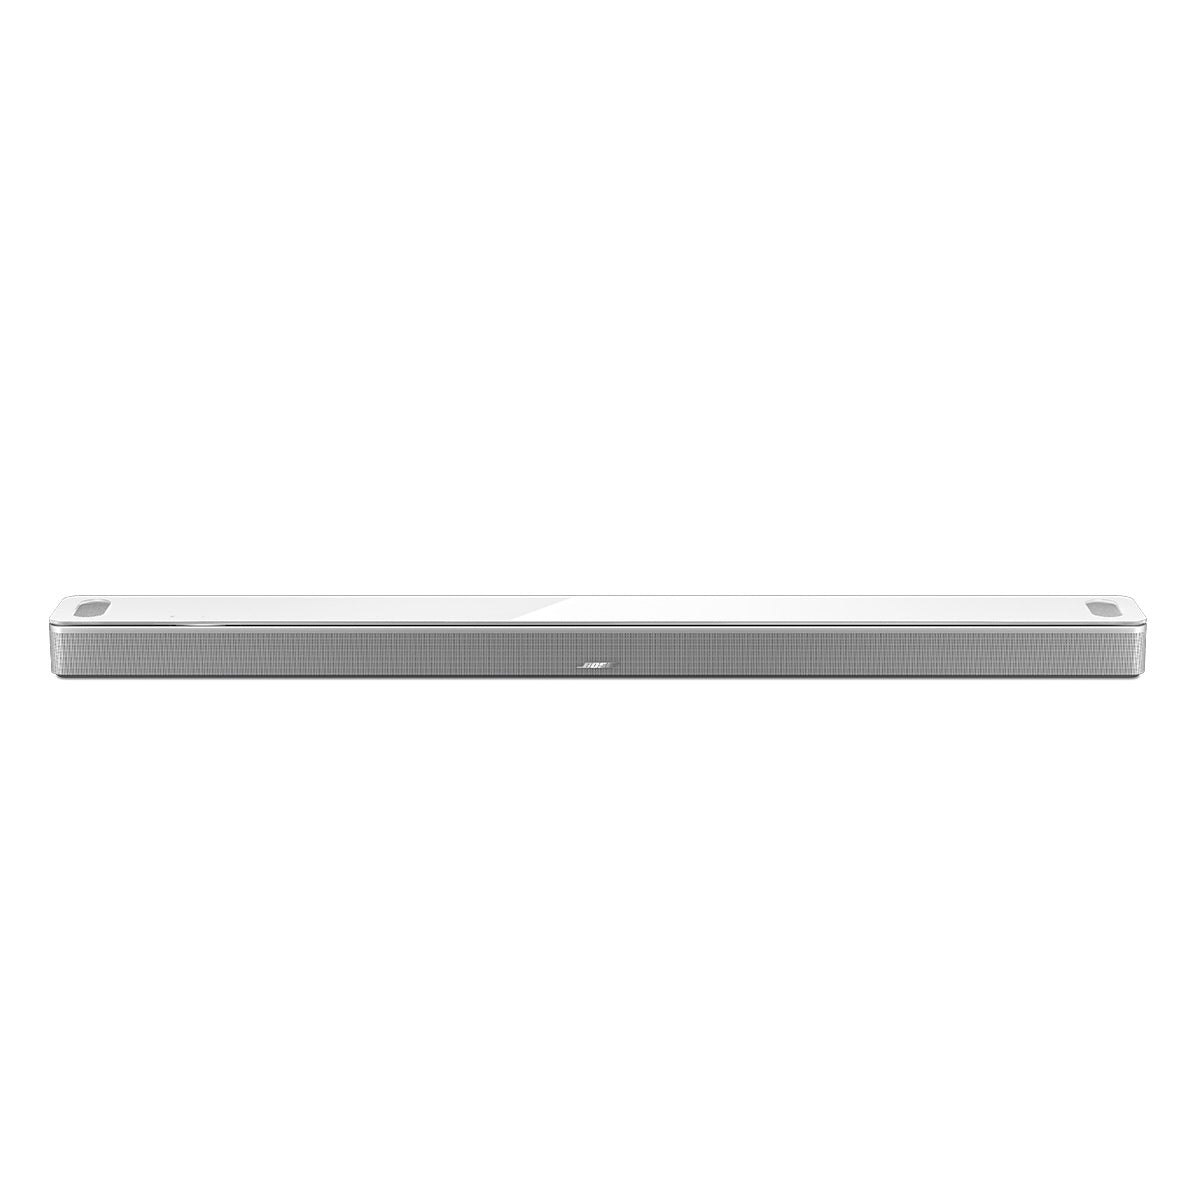 Bose Smart Soundbar 900 Dolby Atmos with Alexa and Google Assistant Voice Control (White)